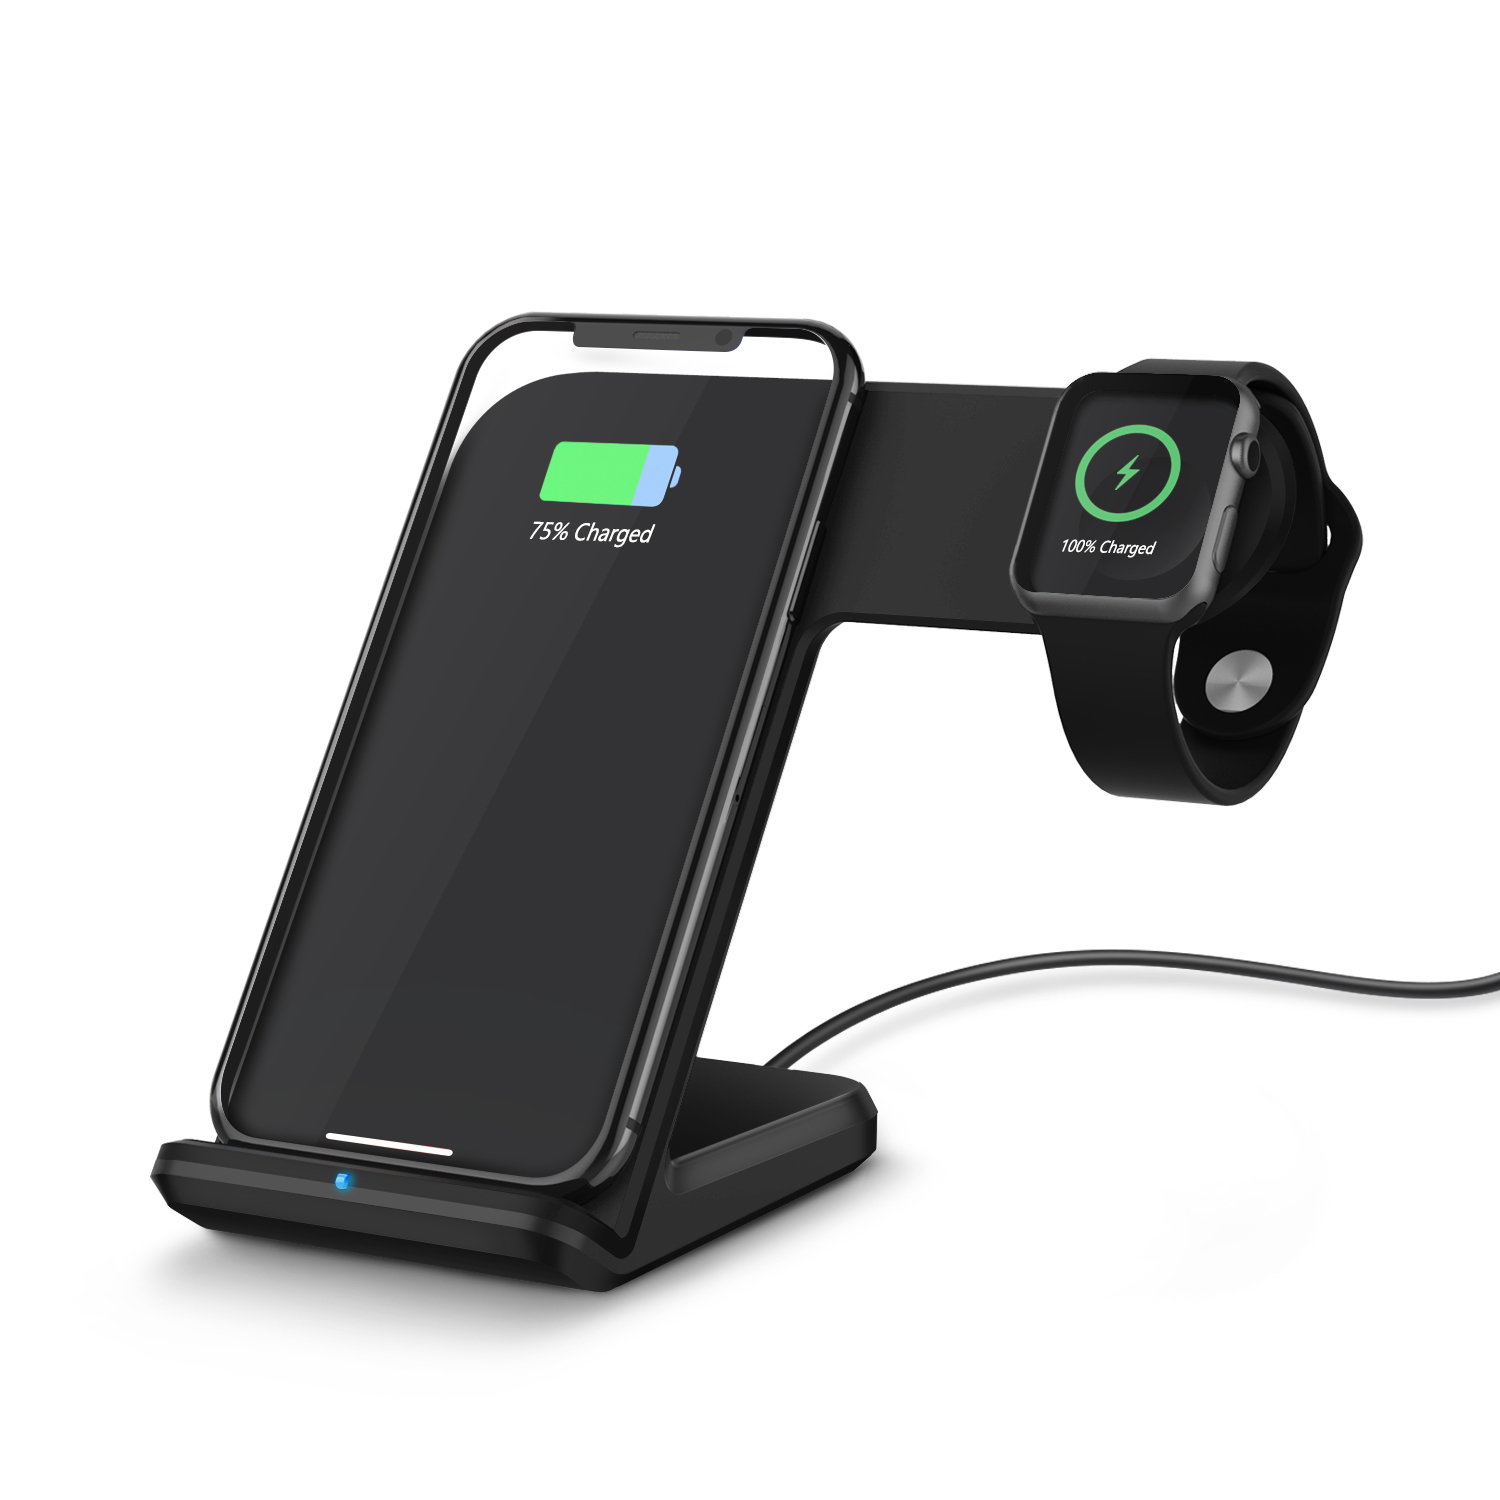 Good Design 2 in 1 Fast Wireless Charging Stand with Magnetic iWatch Charging and Mobile Phone Wireless Charger for iPhone 11 Pro/XS Max/XR/X and Other Qi-Compatible Device (MH-Q420)